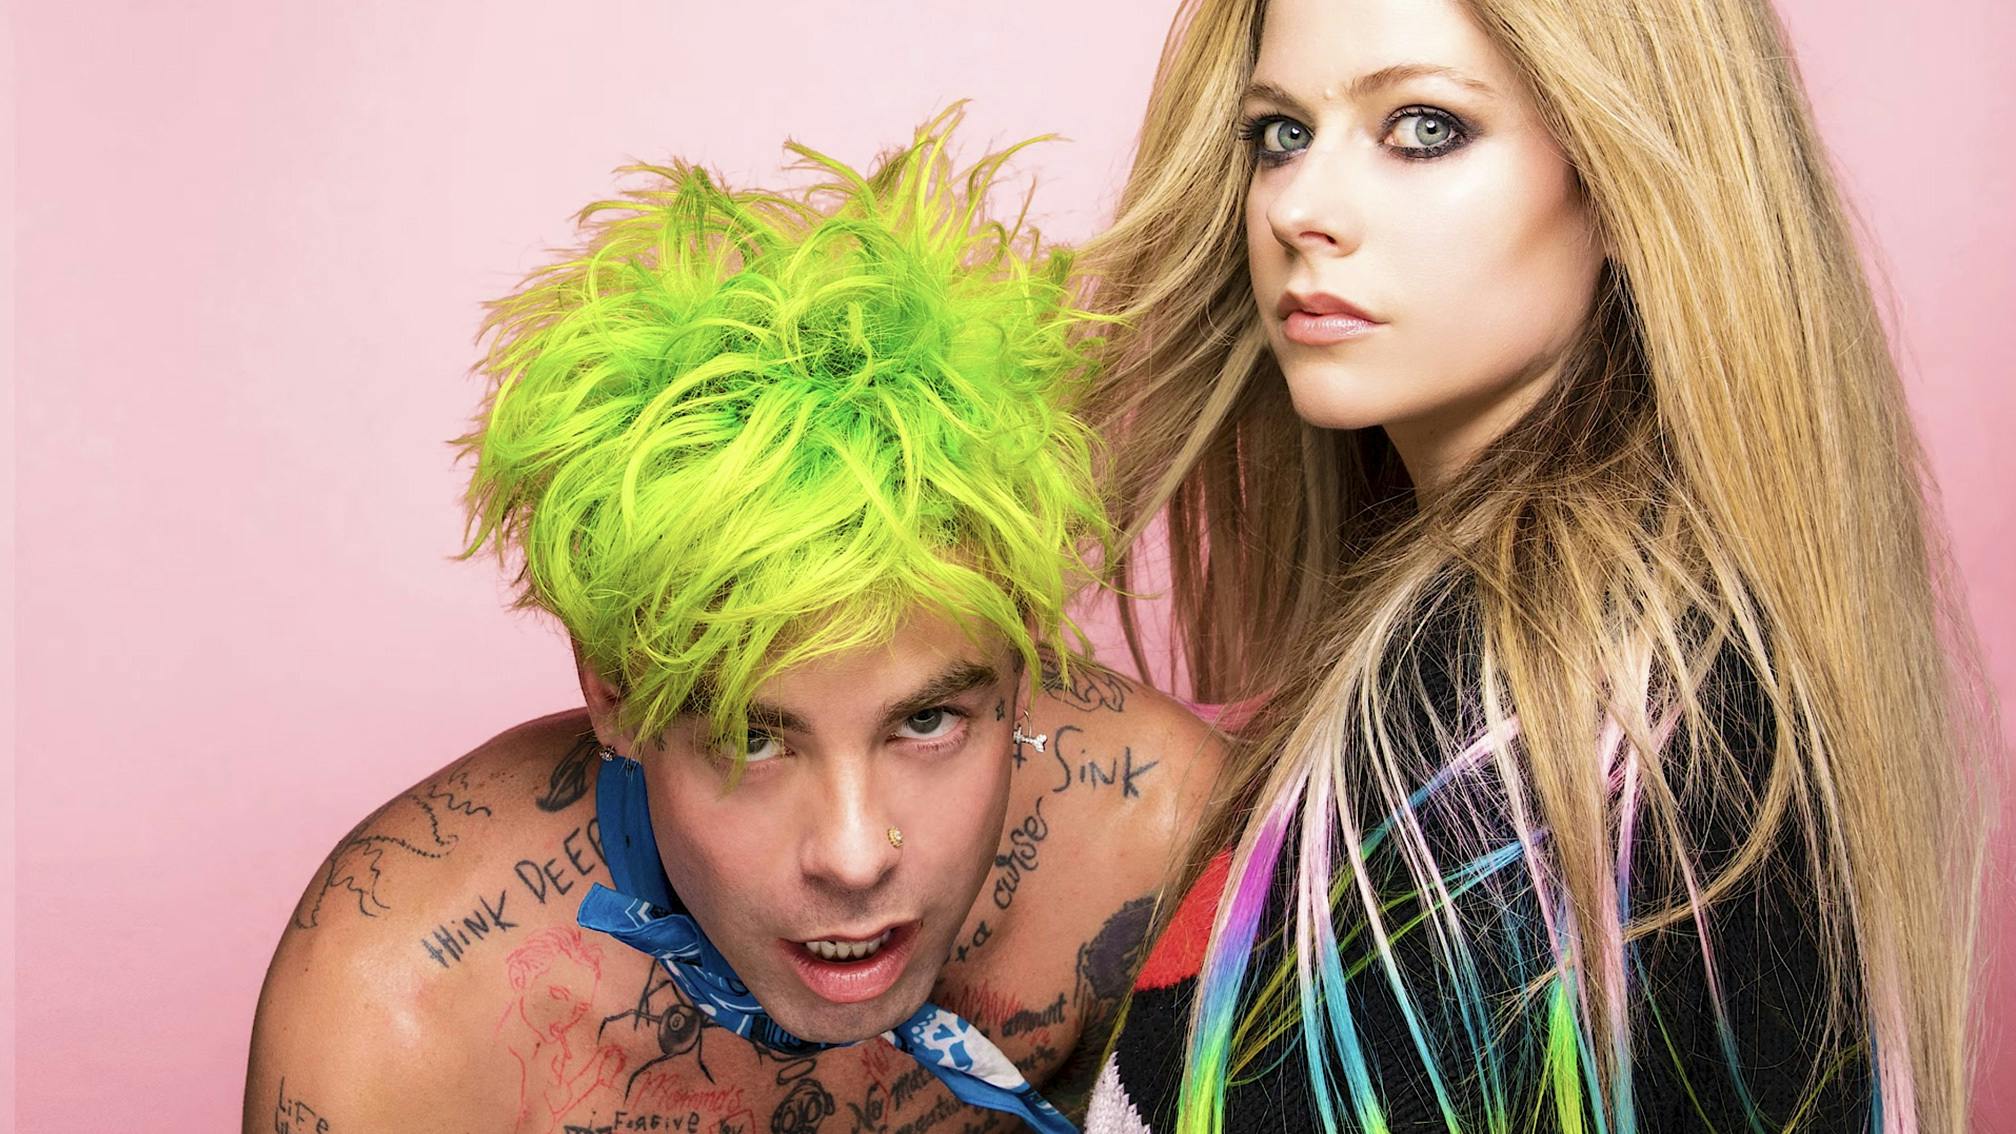 Listen to MOD SUN and Avril Lavigne's anthemic new collaboration